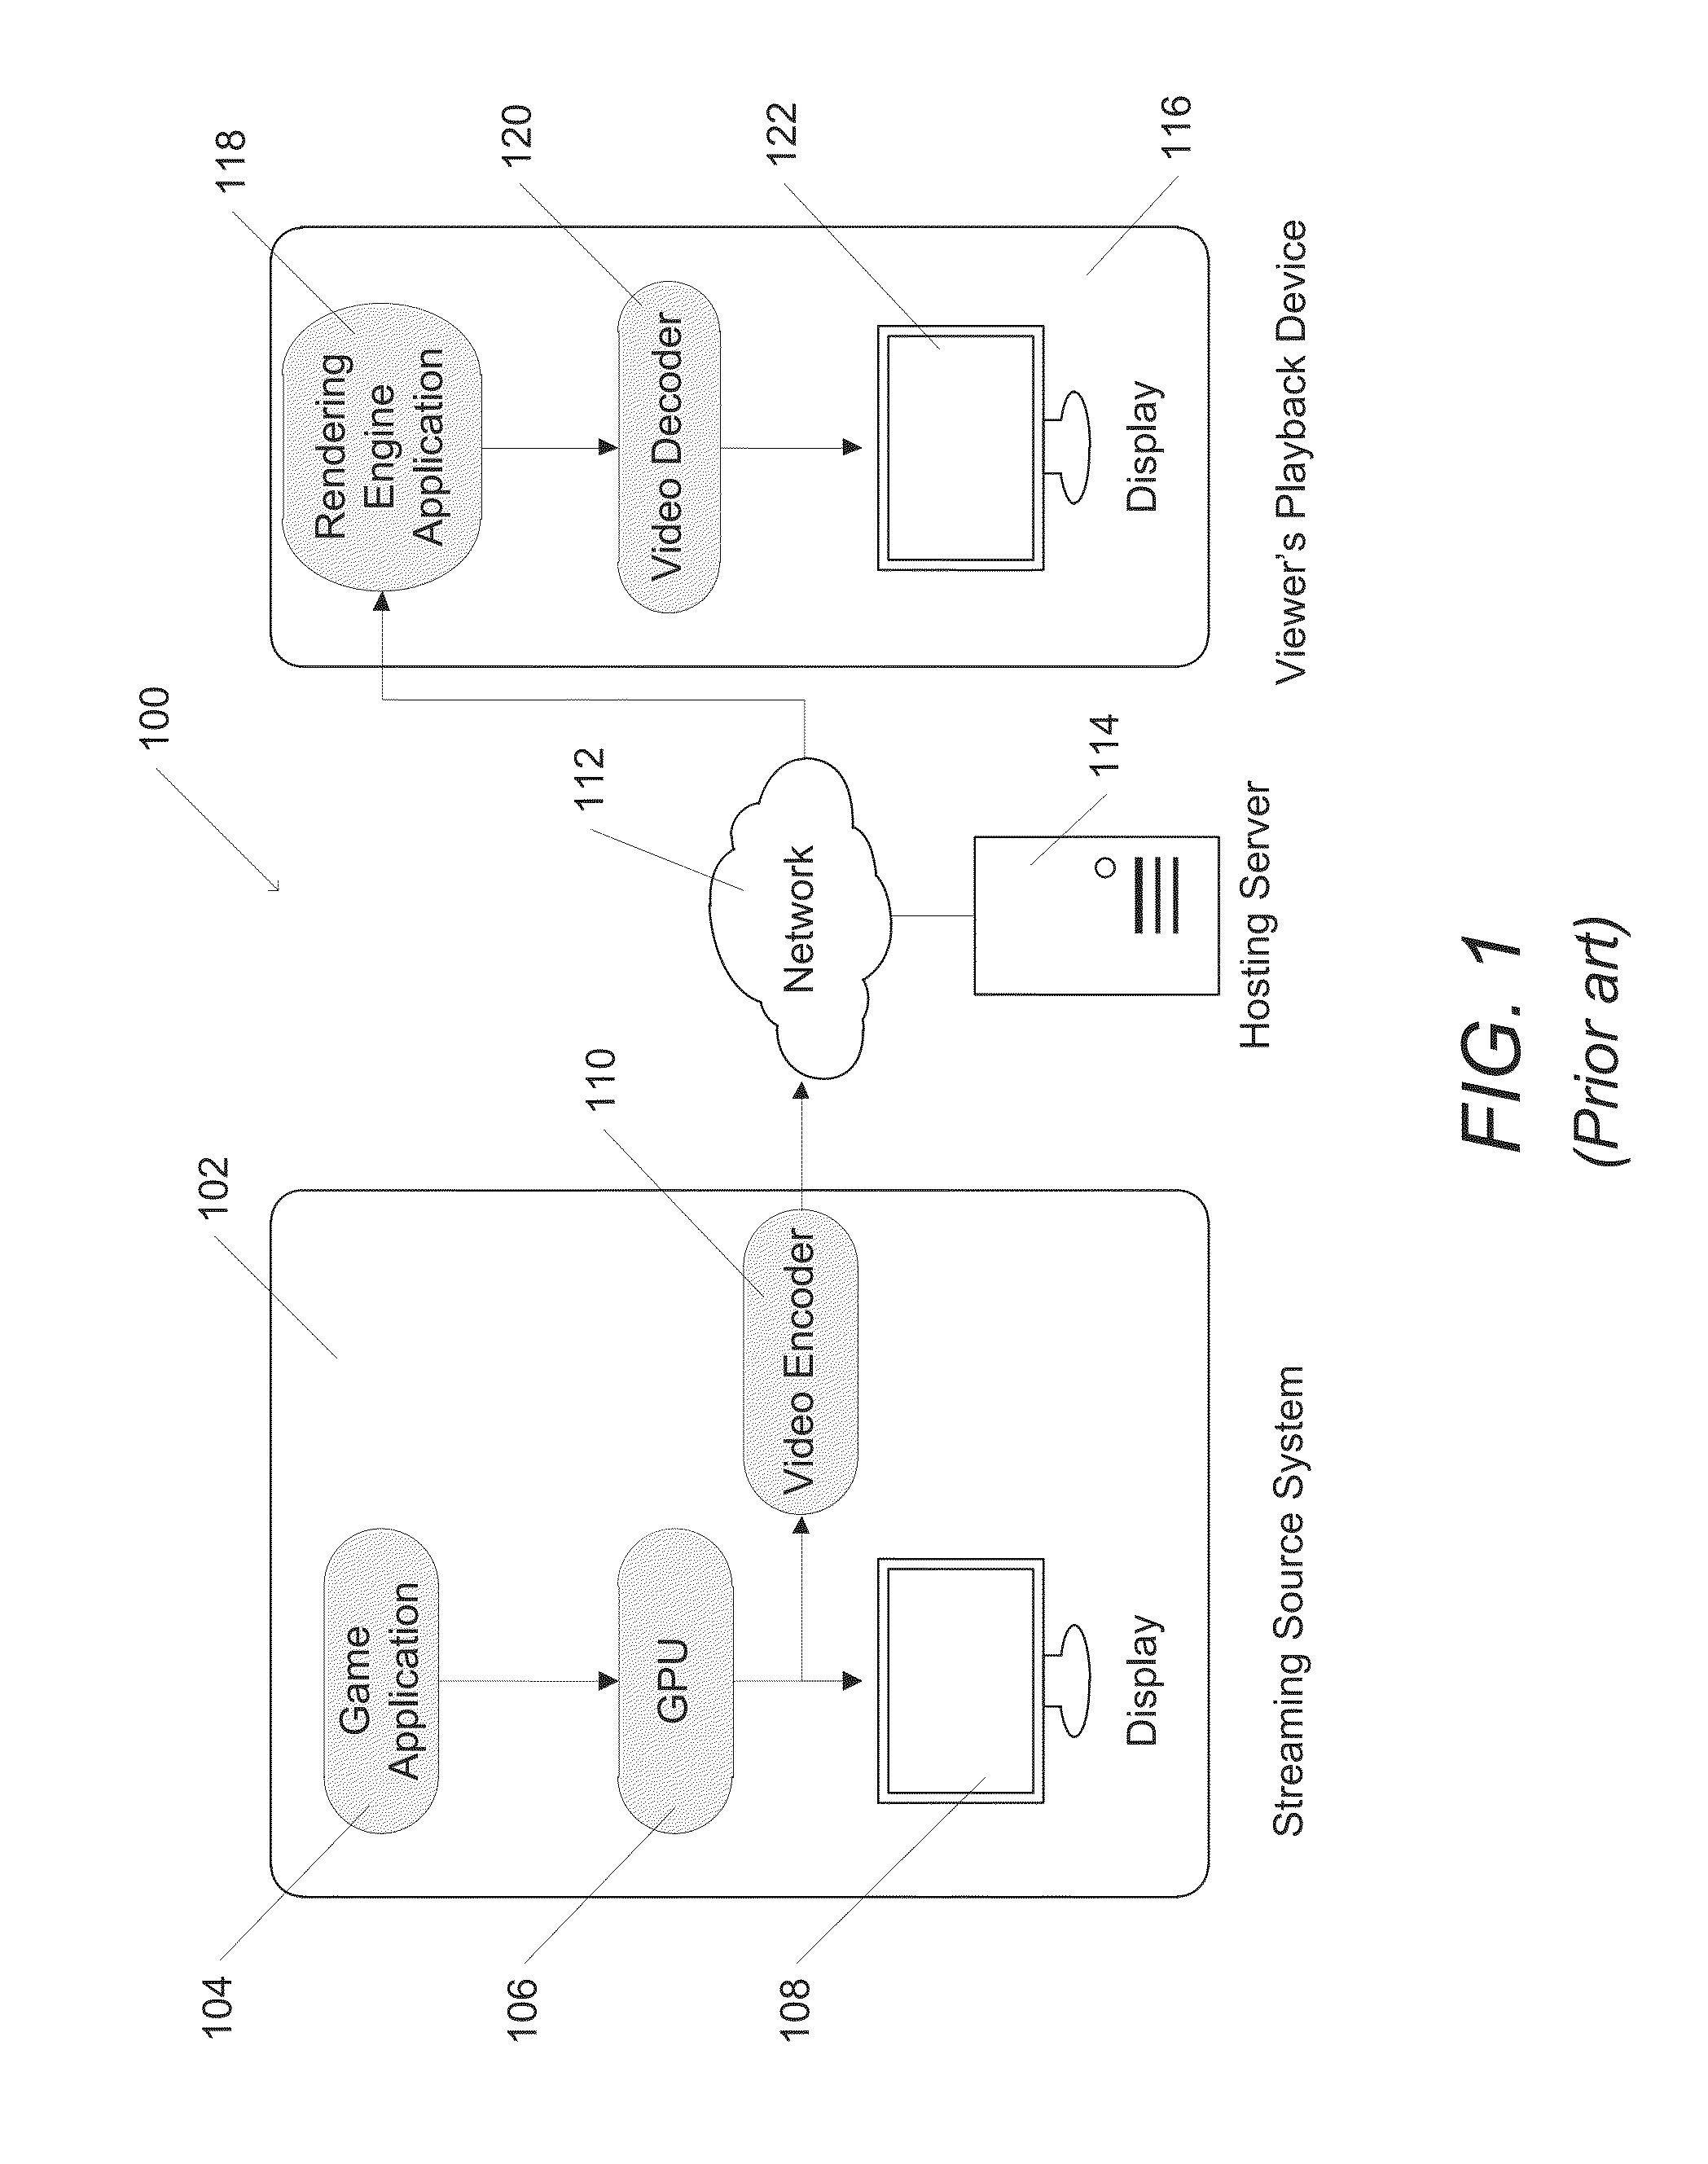 Systems and Methods for Streaming Video Games Using GPU Command Streams